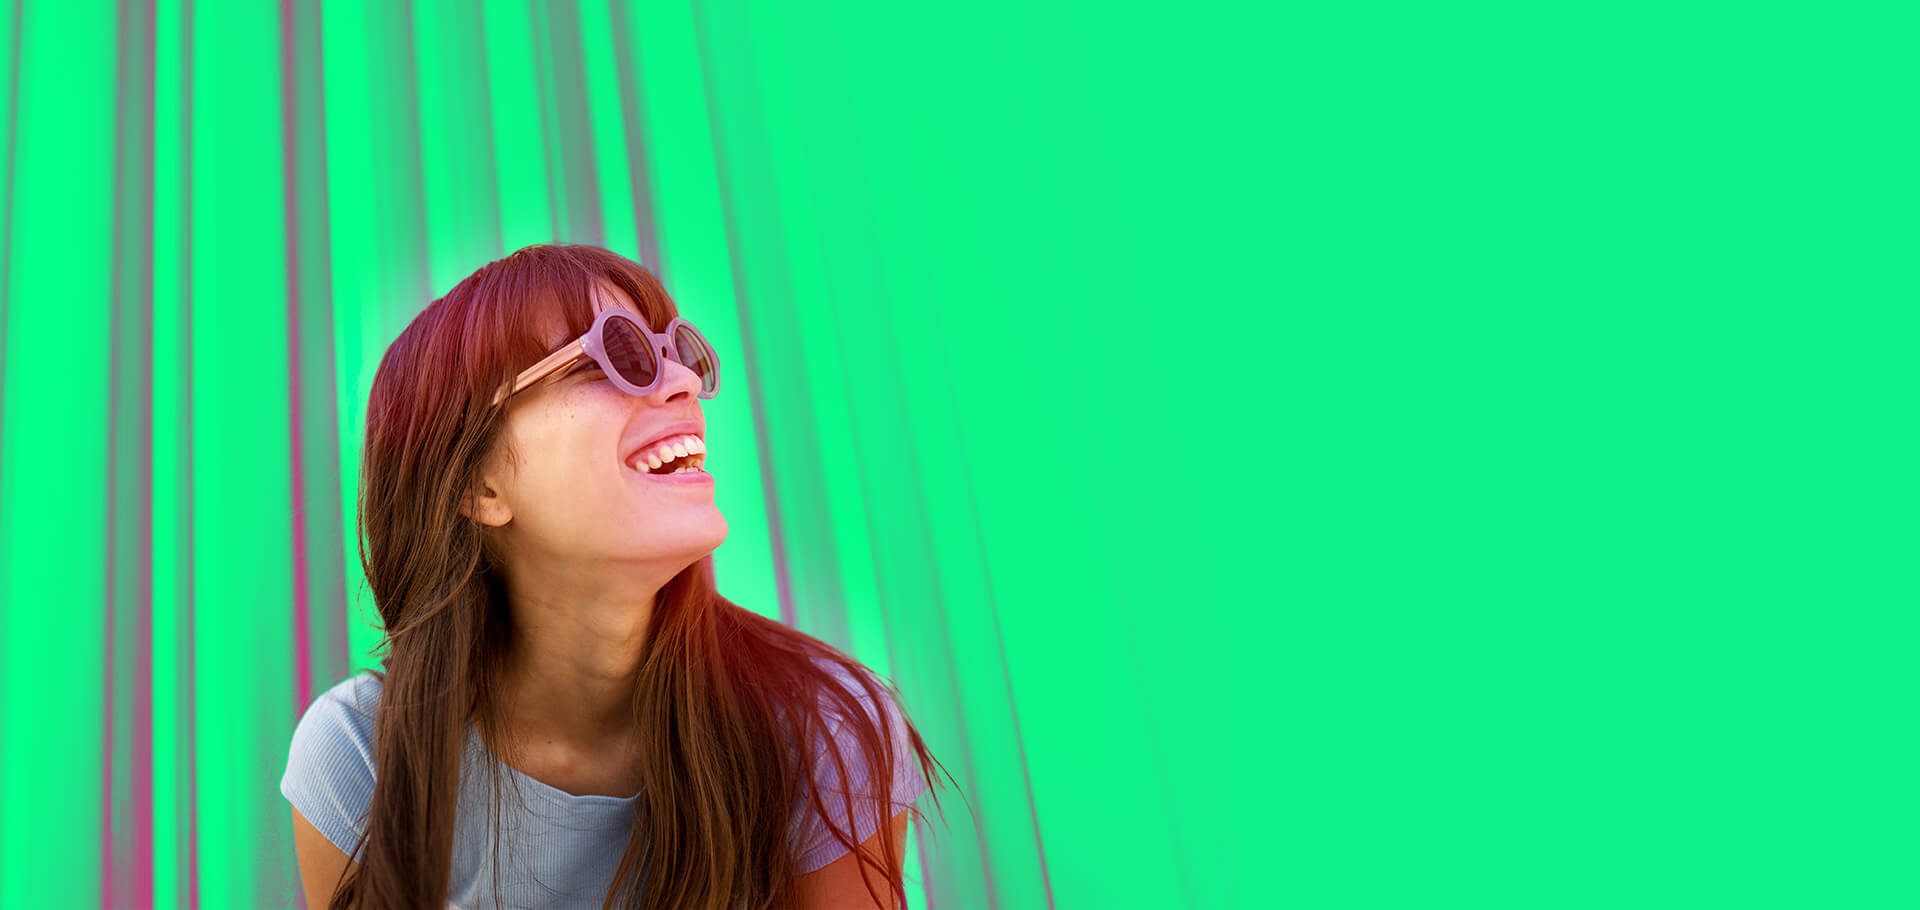 Close up cheerful young woman laughing with sunglasses against colourful background depicting Virtual Account